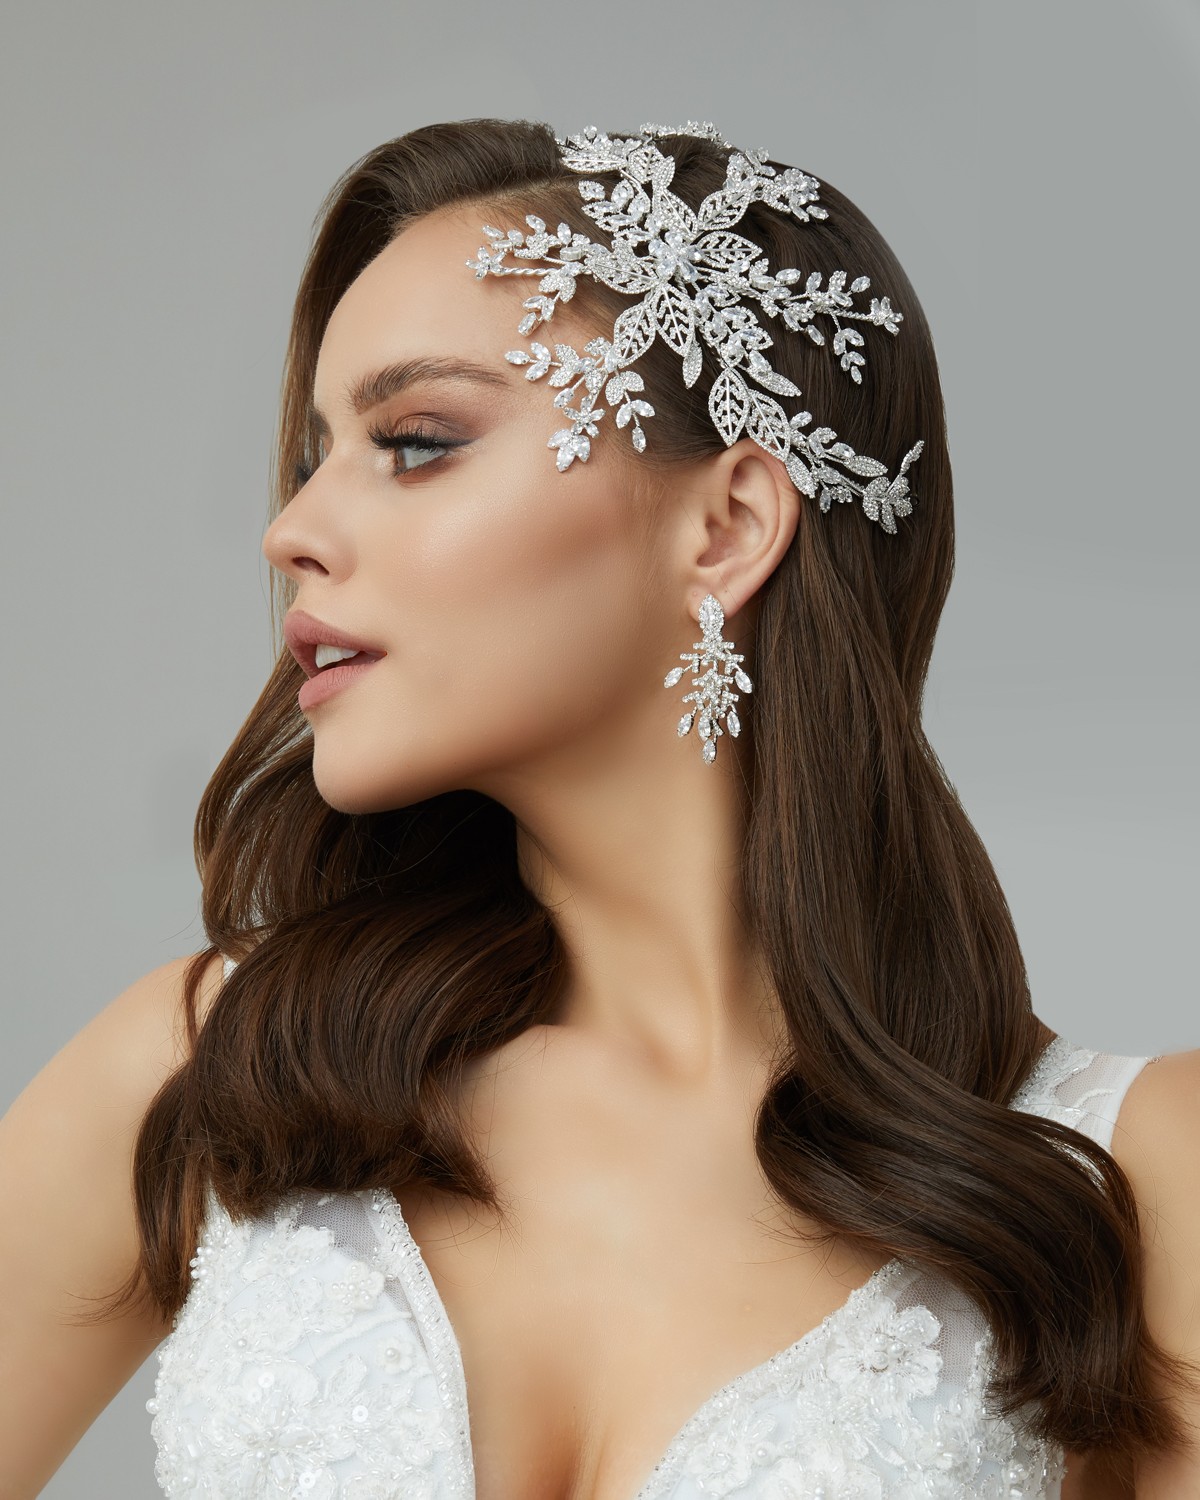 Flanell Zircon Stone Hair Accessories Buy Now.